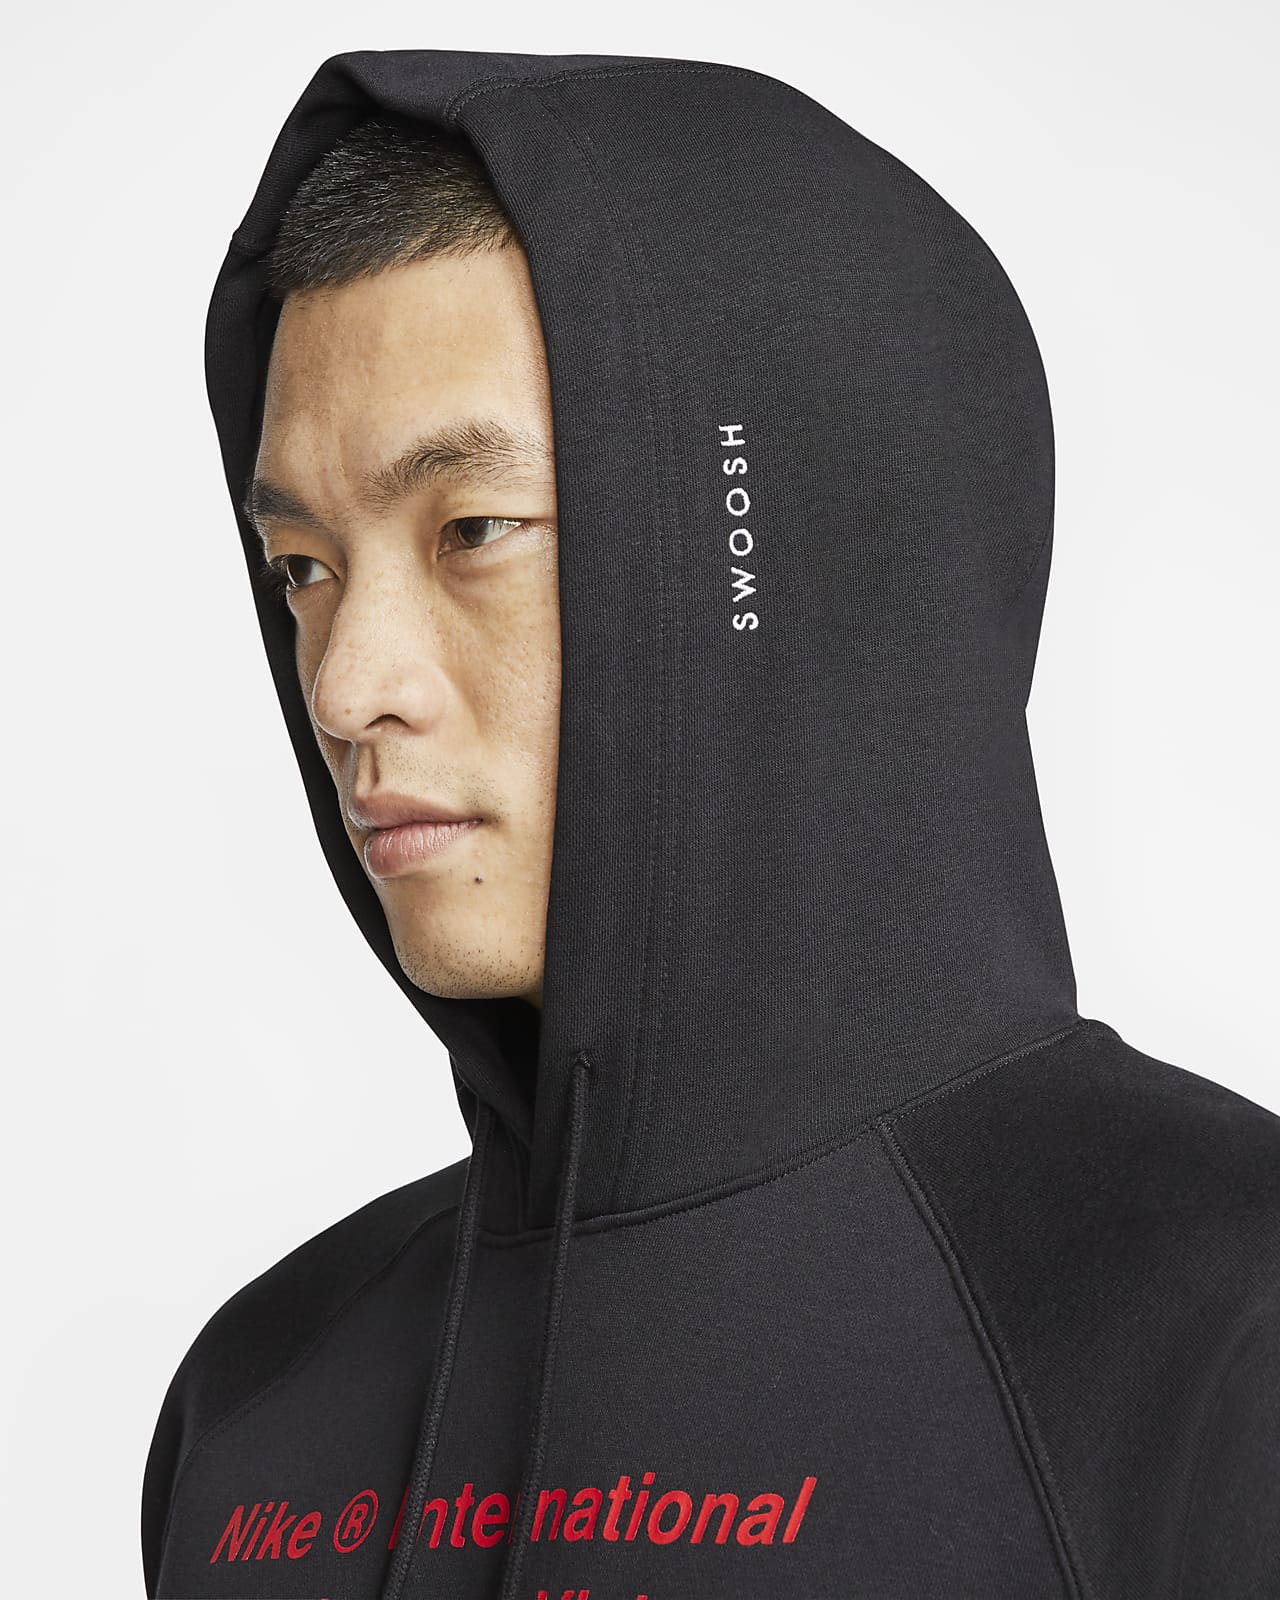 nike sportswear nsw french terry pullover hoodie